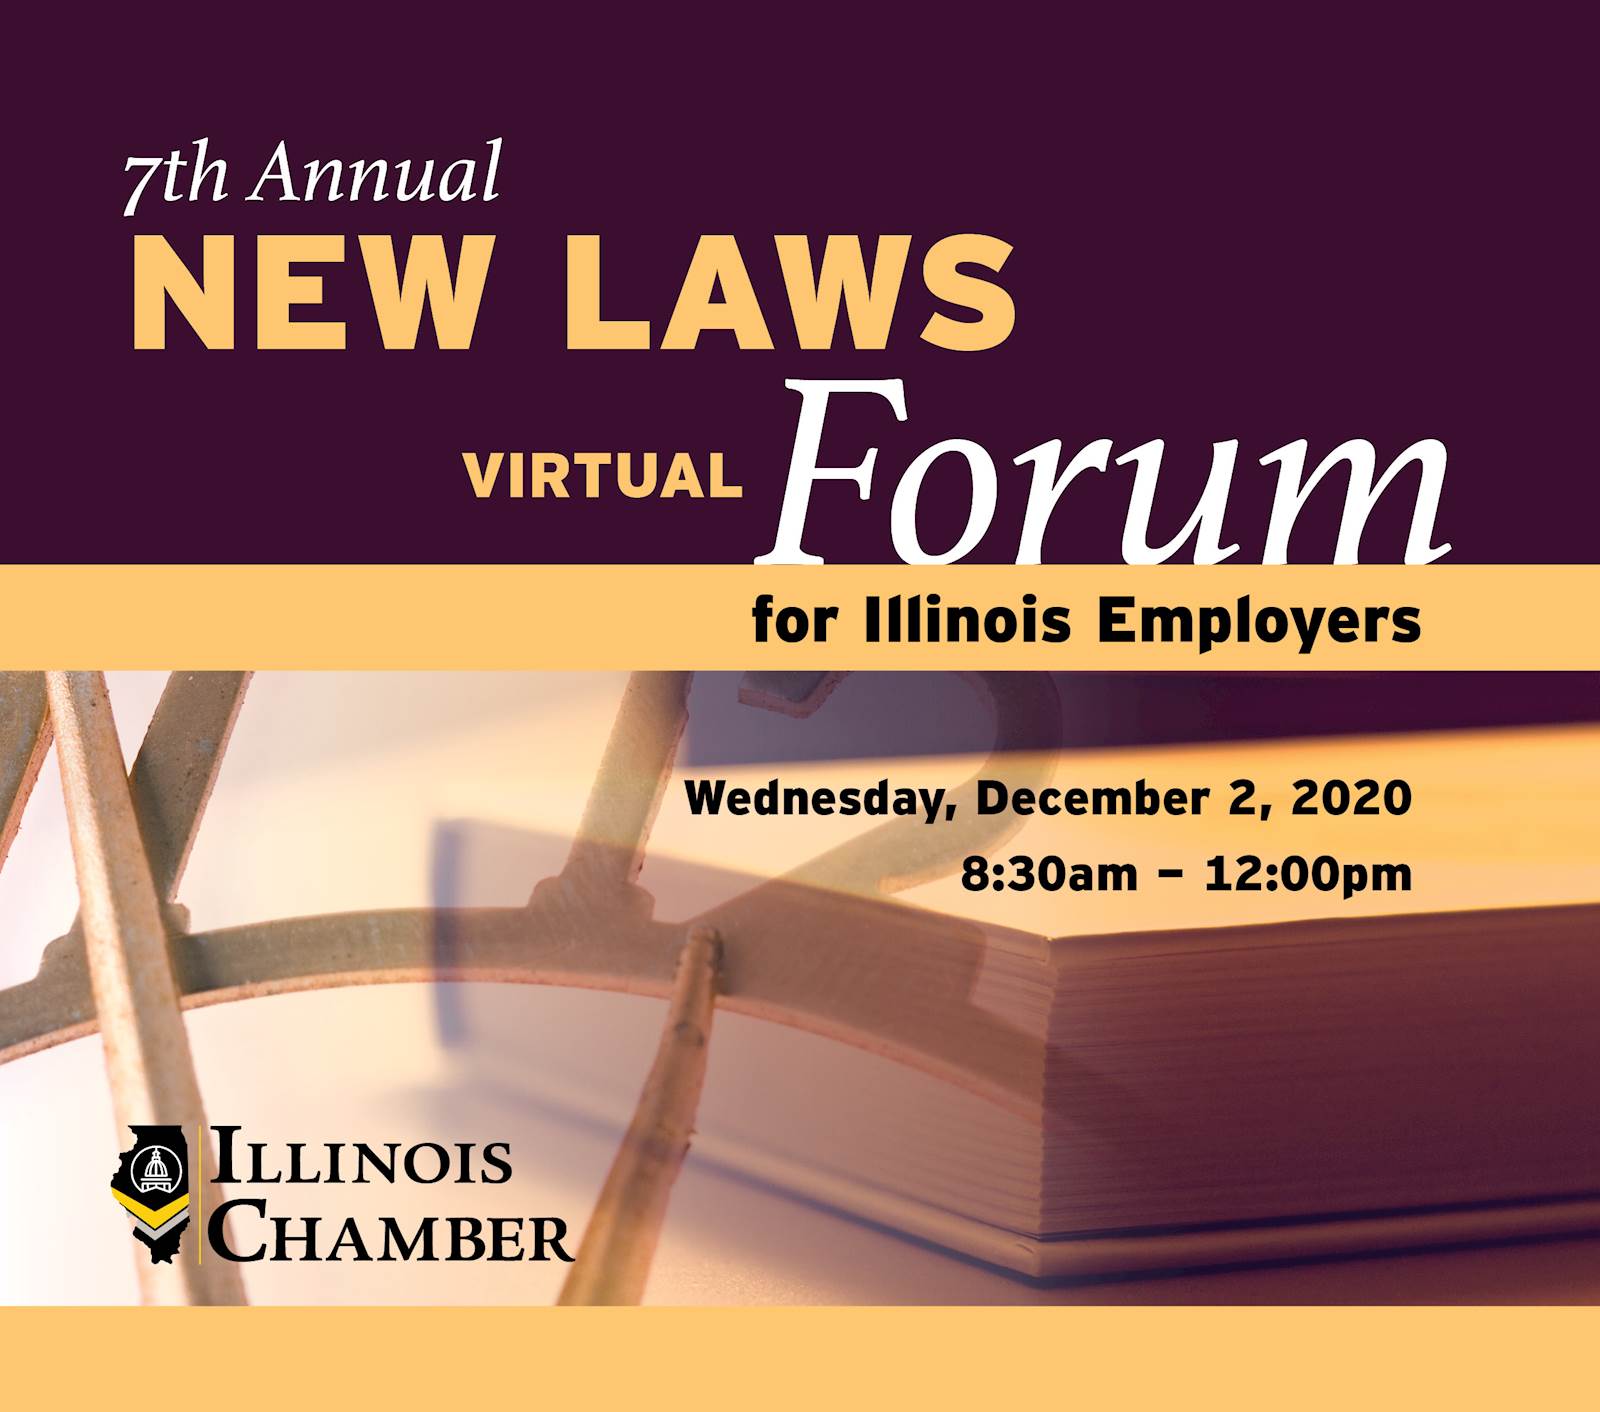 7th Annual Illinois Chamber of Commerce New Laws Forum